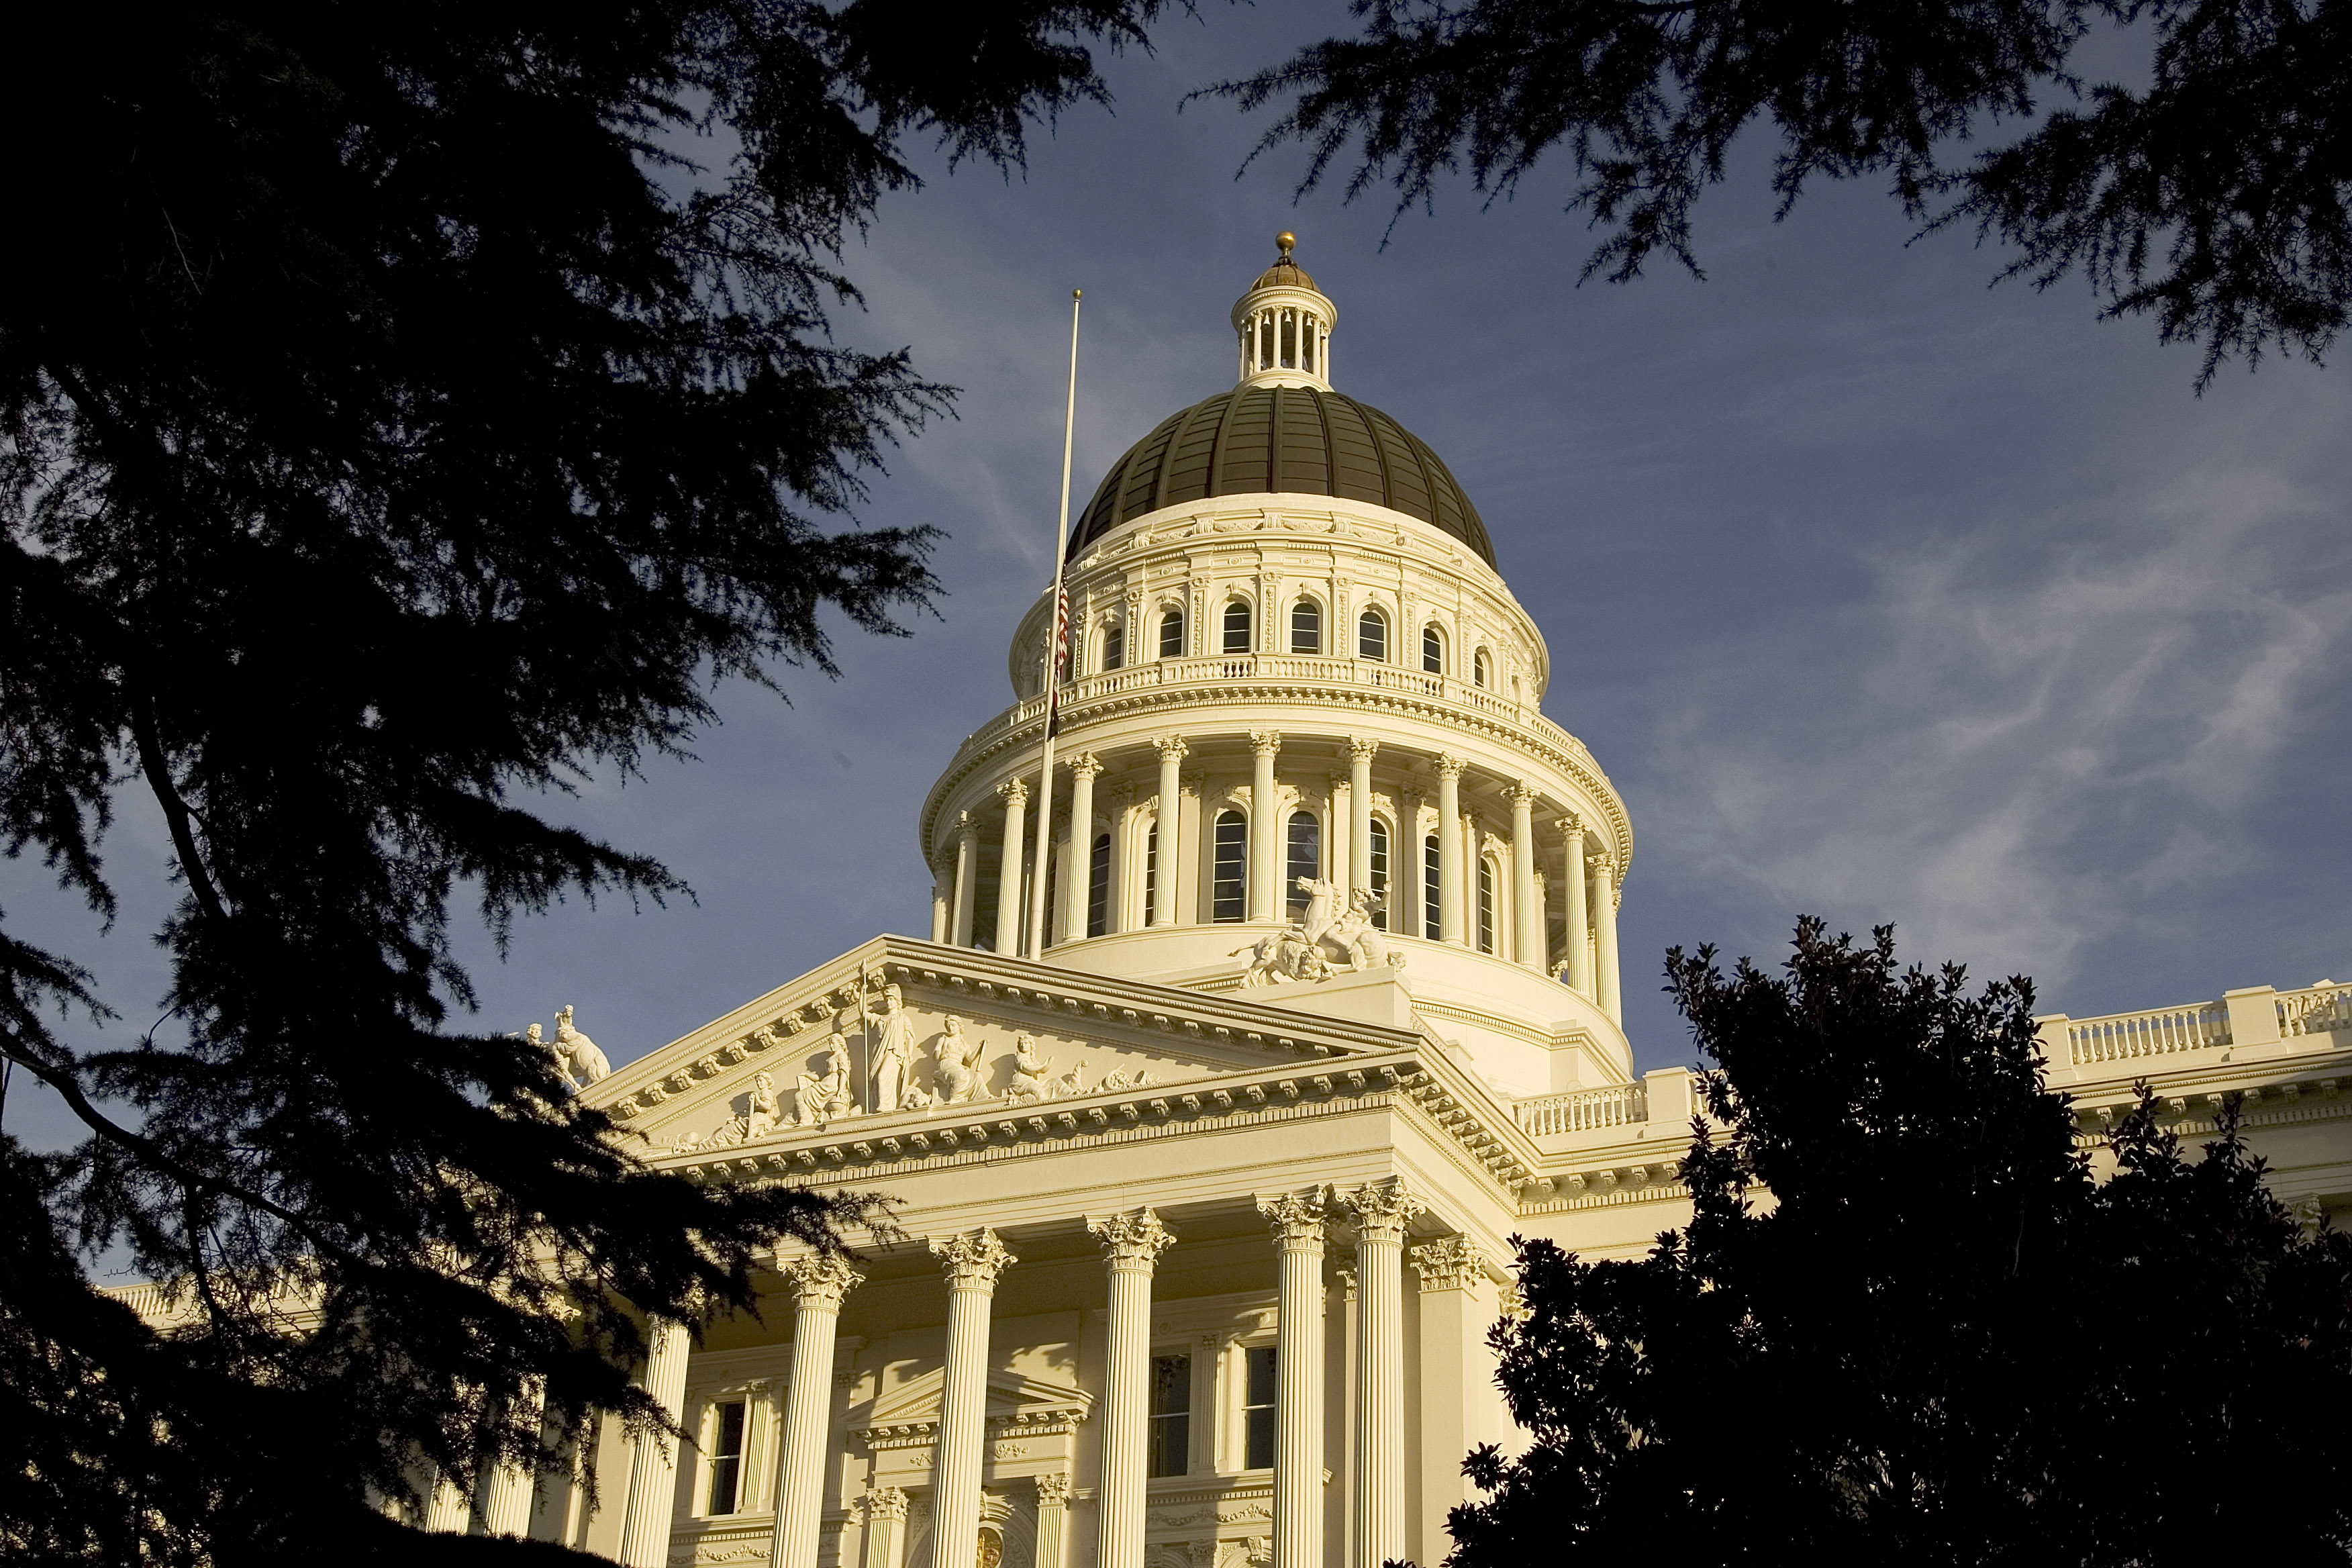 An exterior of the California state Capitol in Sacramento is shown on January 5, 2006. (David Paul Morris/Getty Images)